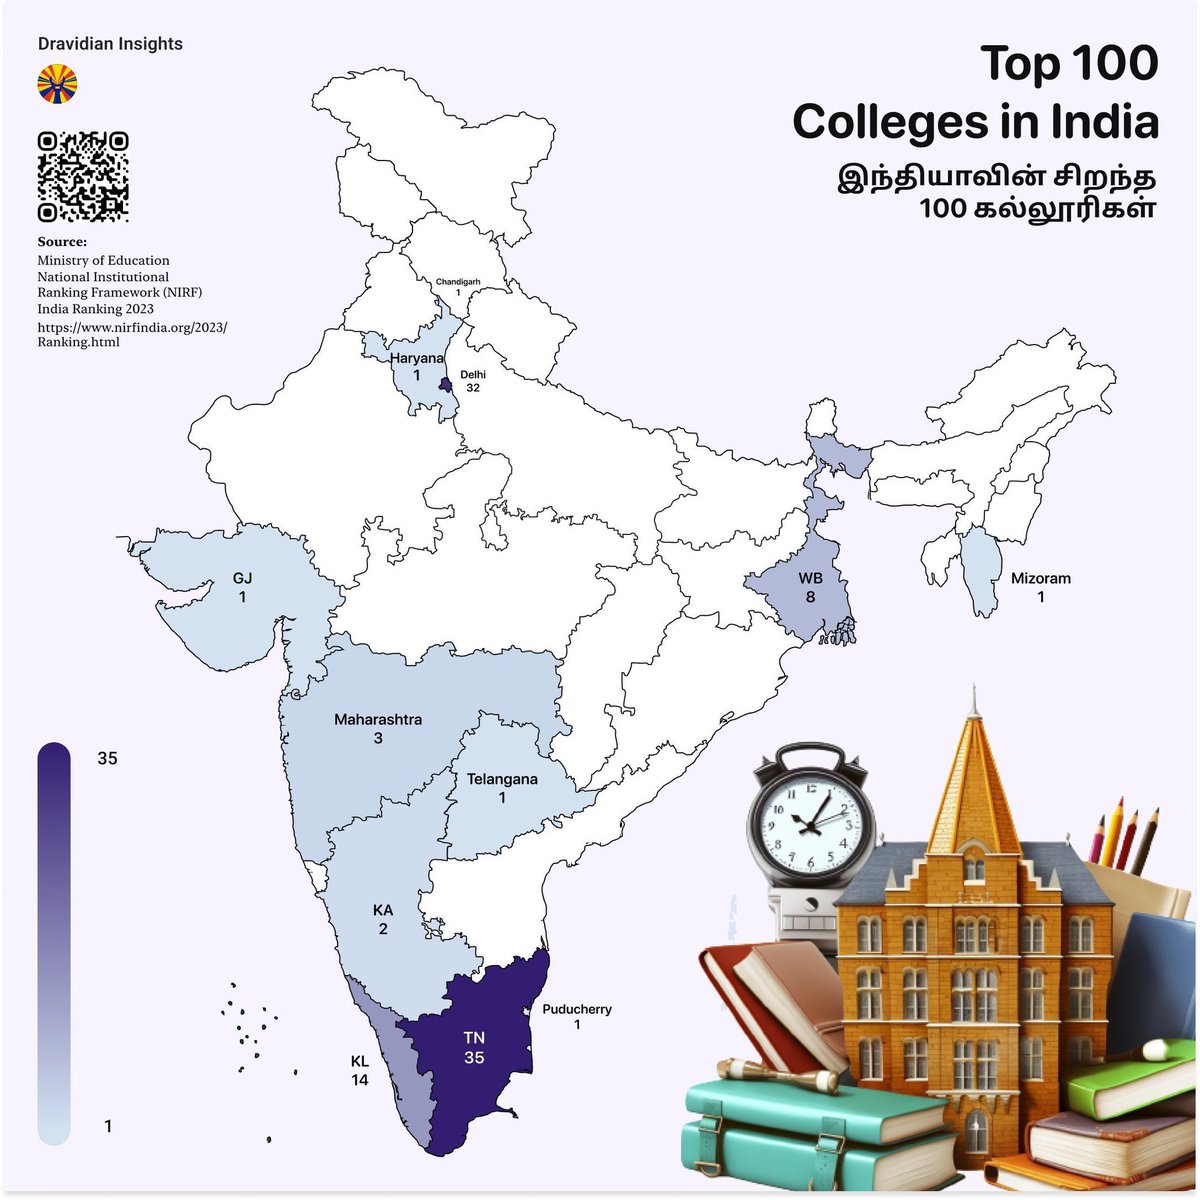 Out of the top 100 colleges ranked by the Ministry of Education, Govt of India for providing quality education.

35 colleges are from Tamil Nadu, 
32 are from Delhi, 
14 are from Kerala 
19 are from the rest of India.

(Source: NIRF rankings - 2023)